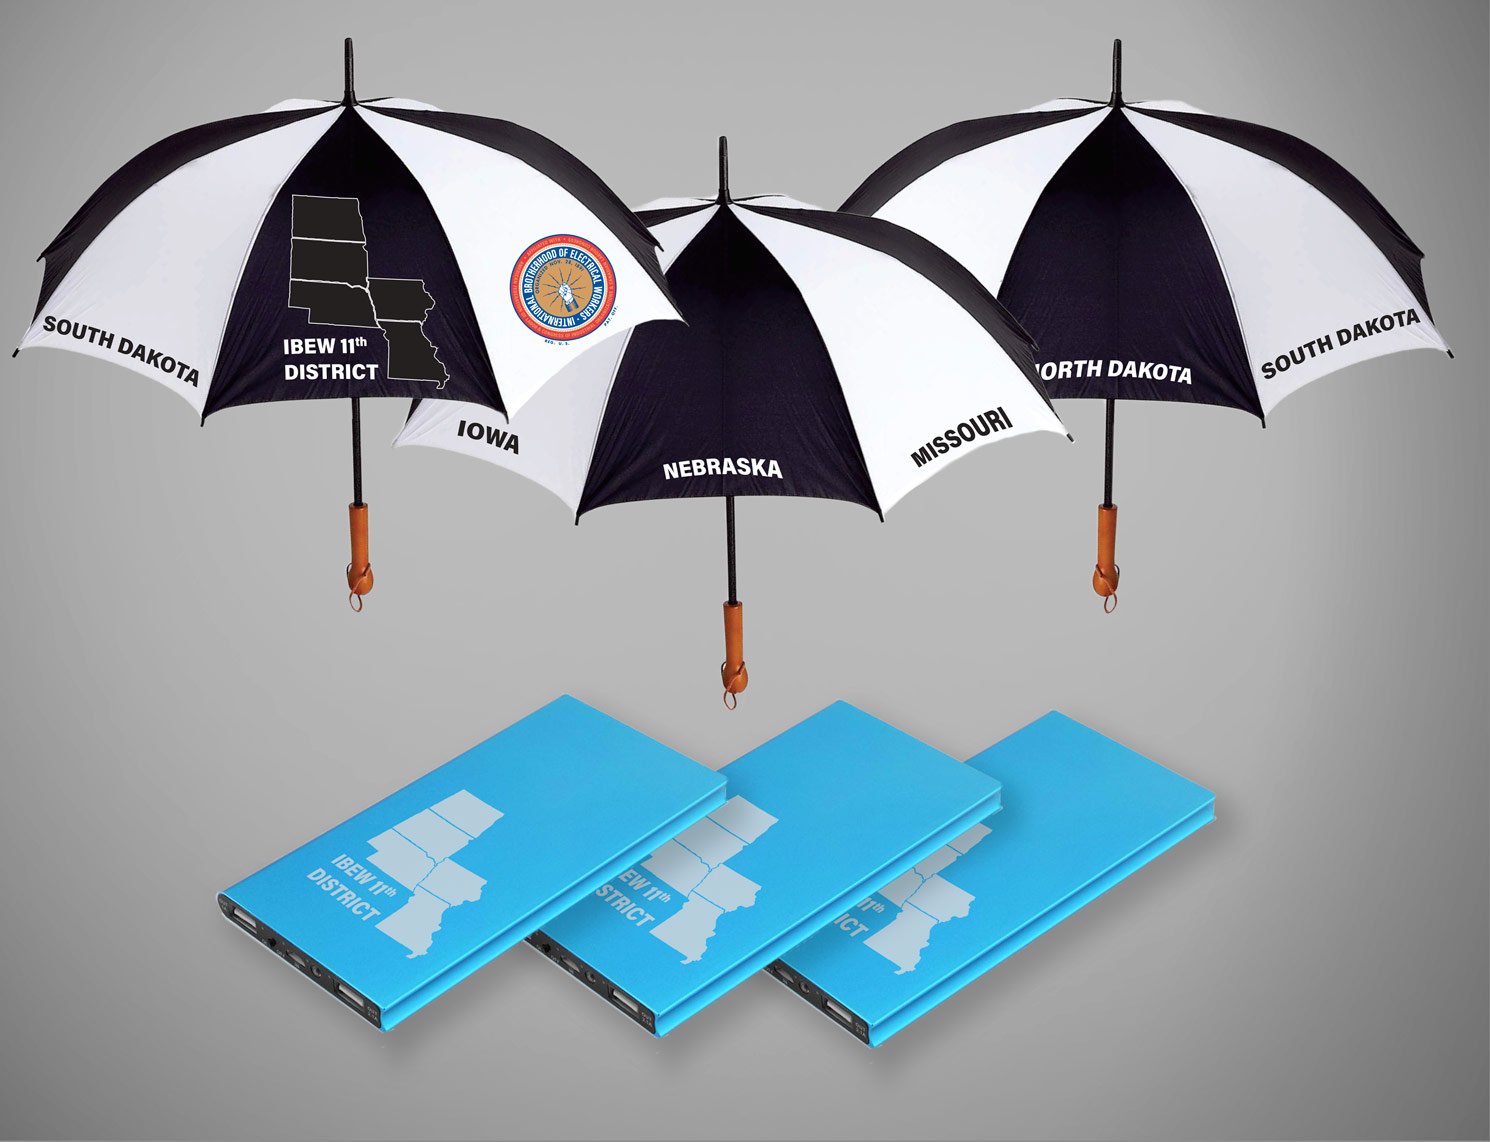 IBEW 11th District Umbrellas and Power Banks